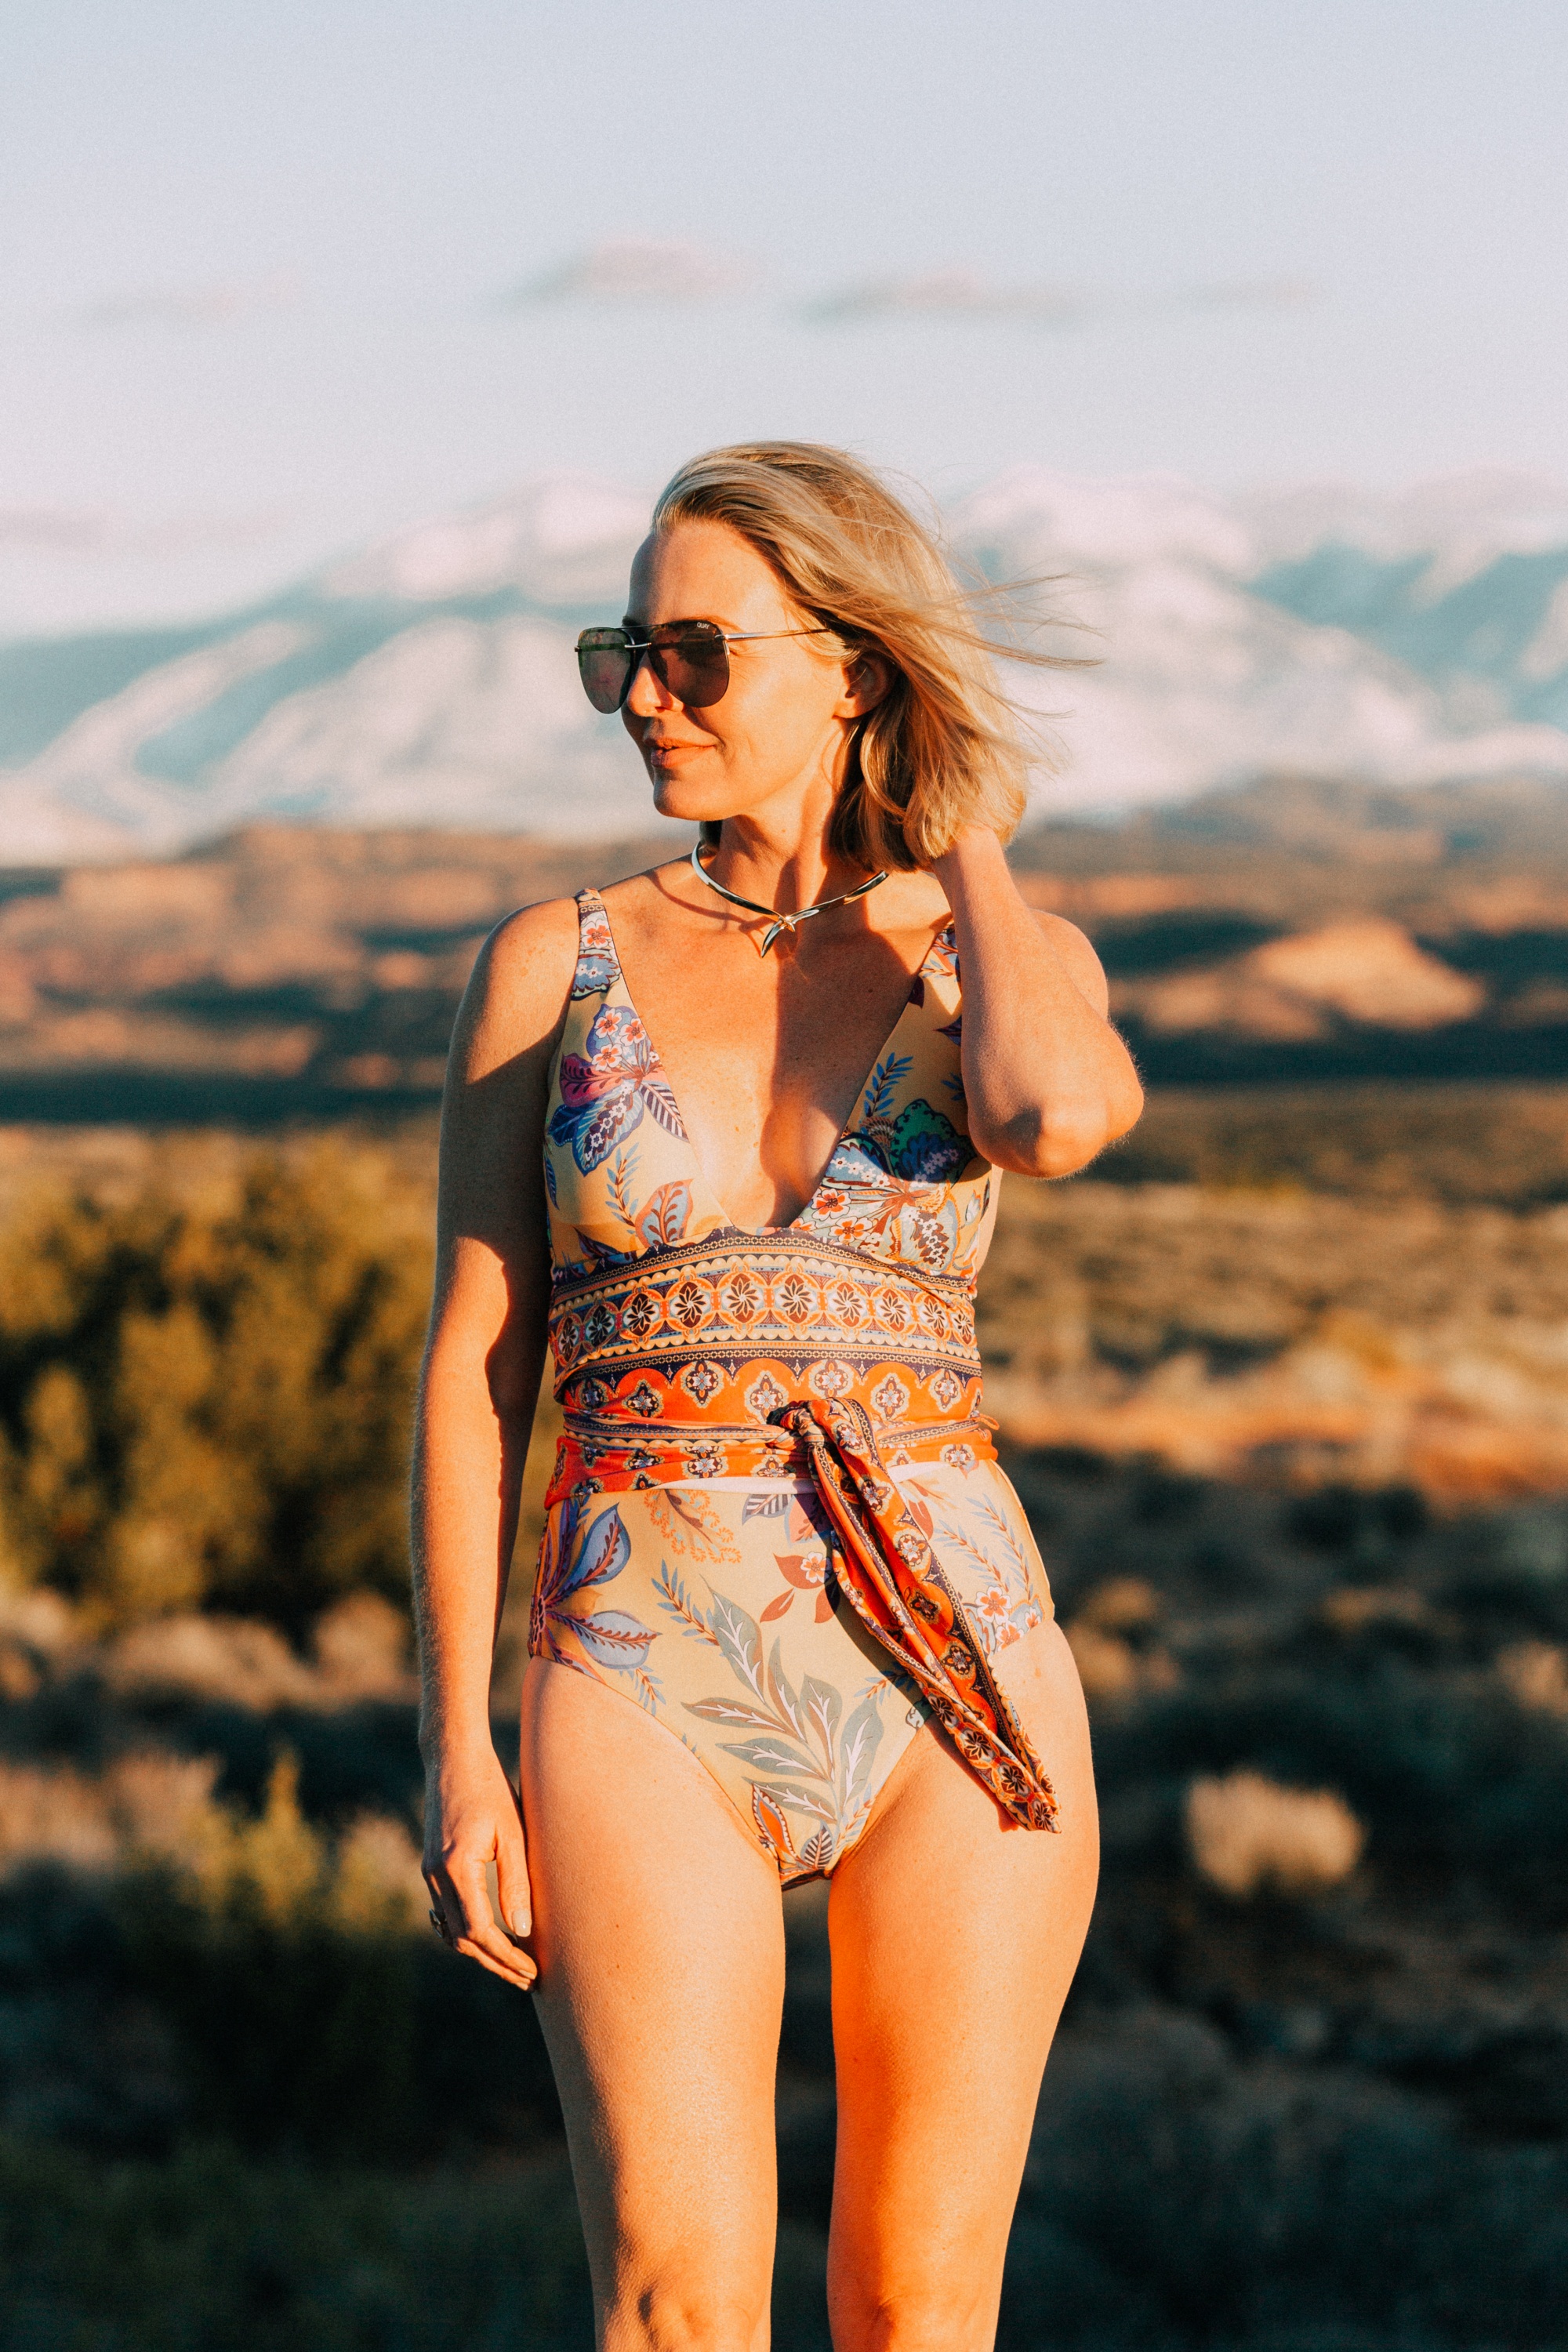 Full Coverage Swimsuits, Fashion blogger Erin Busbee of BusbeeStyle.com wearing a paisley print one piece swimsuit by Becca in Moab, Utah